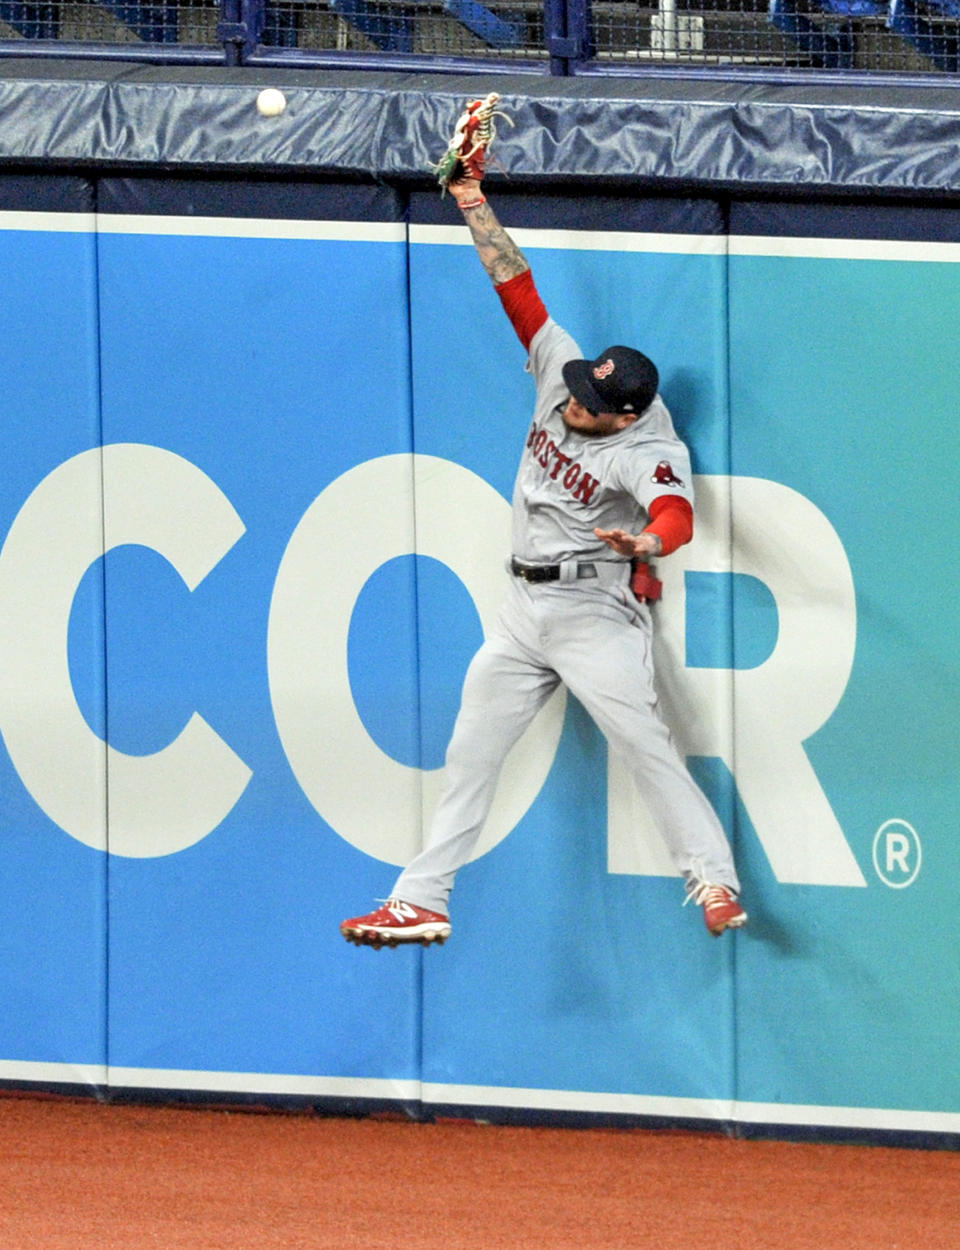 Boston Red Sox right fielder Alex Verdugo comes up short as he leaps for a double off the wall hit by Tampa Bay Rays' Yandy Diaz during the first inning of a baseball game Wednesday, Aug. 5, 2020, in St. Petersburg, Fla. (AP Photo/Steve Nesius)